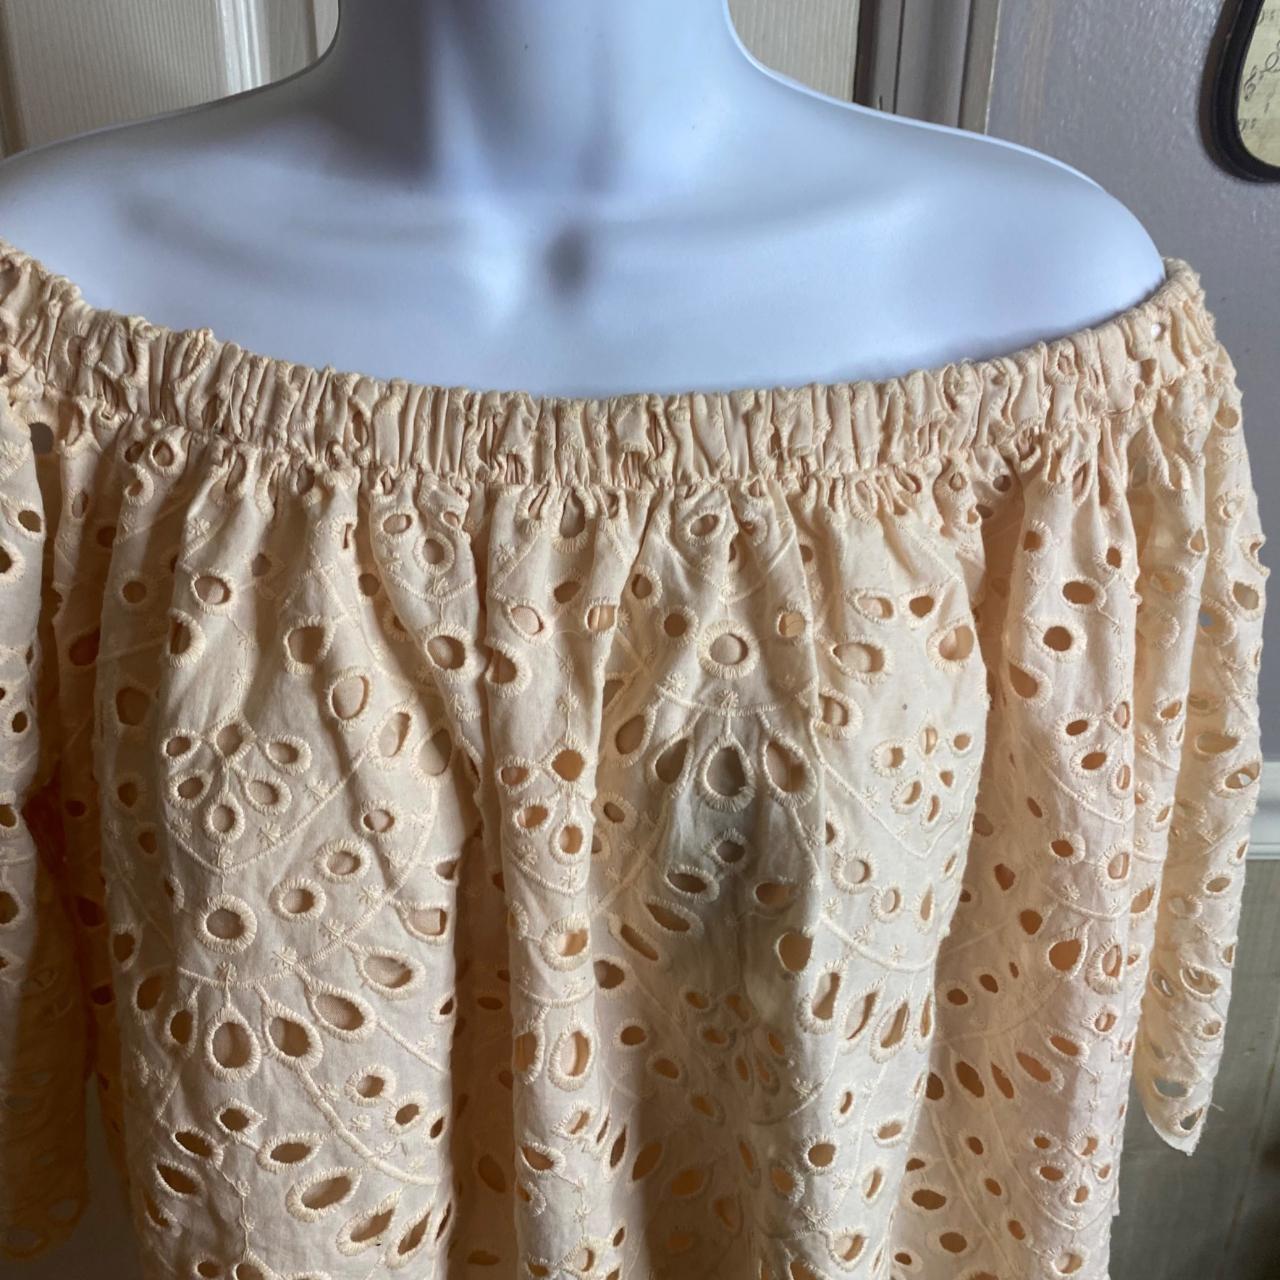 Product Image 2 - MINISTRY OF STYLE TOP

EYELET

PEACH IN